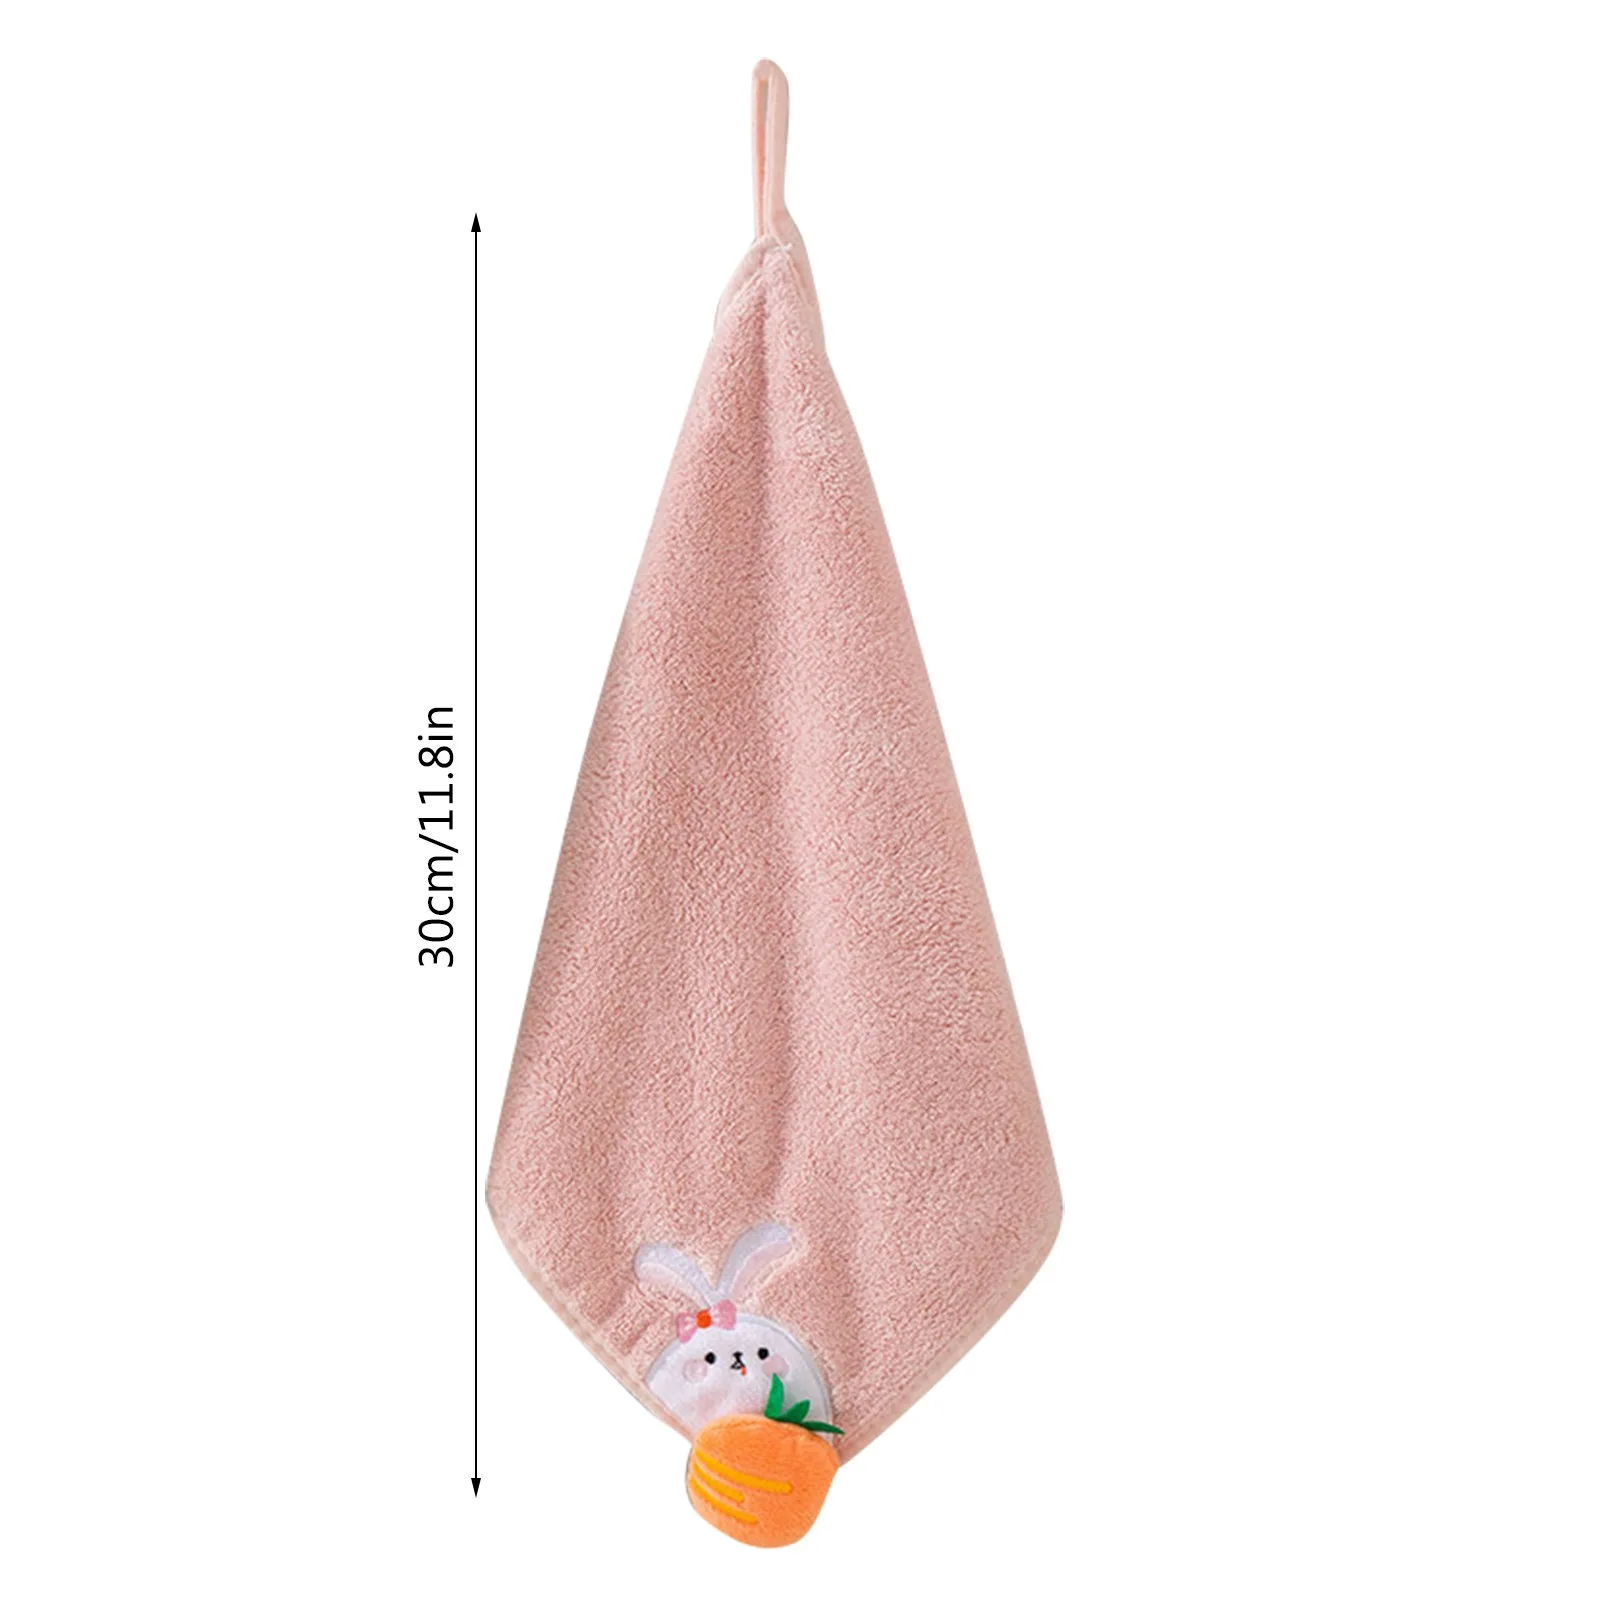 Upgrade New Dish Towels Coral Fleece Ultrasonic Small Square Towel Cloth  30×30cm Wipes Household